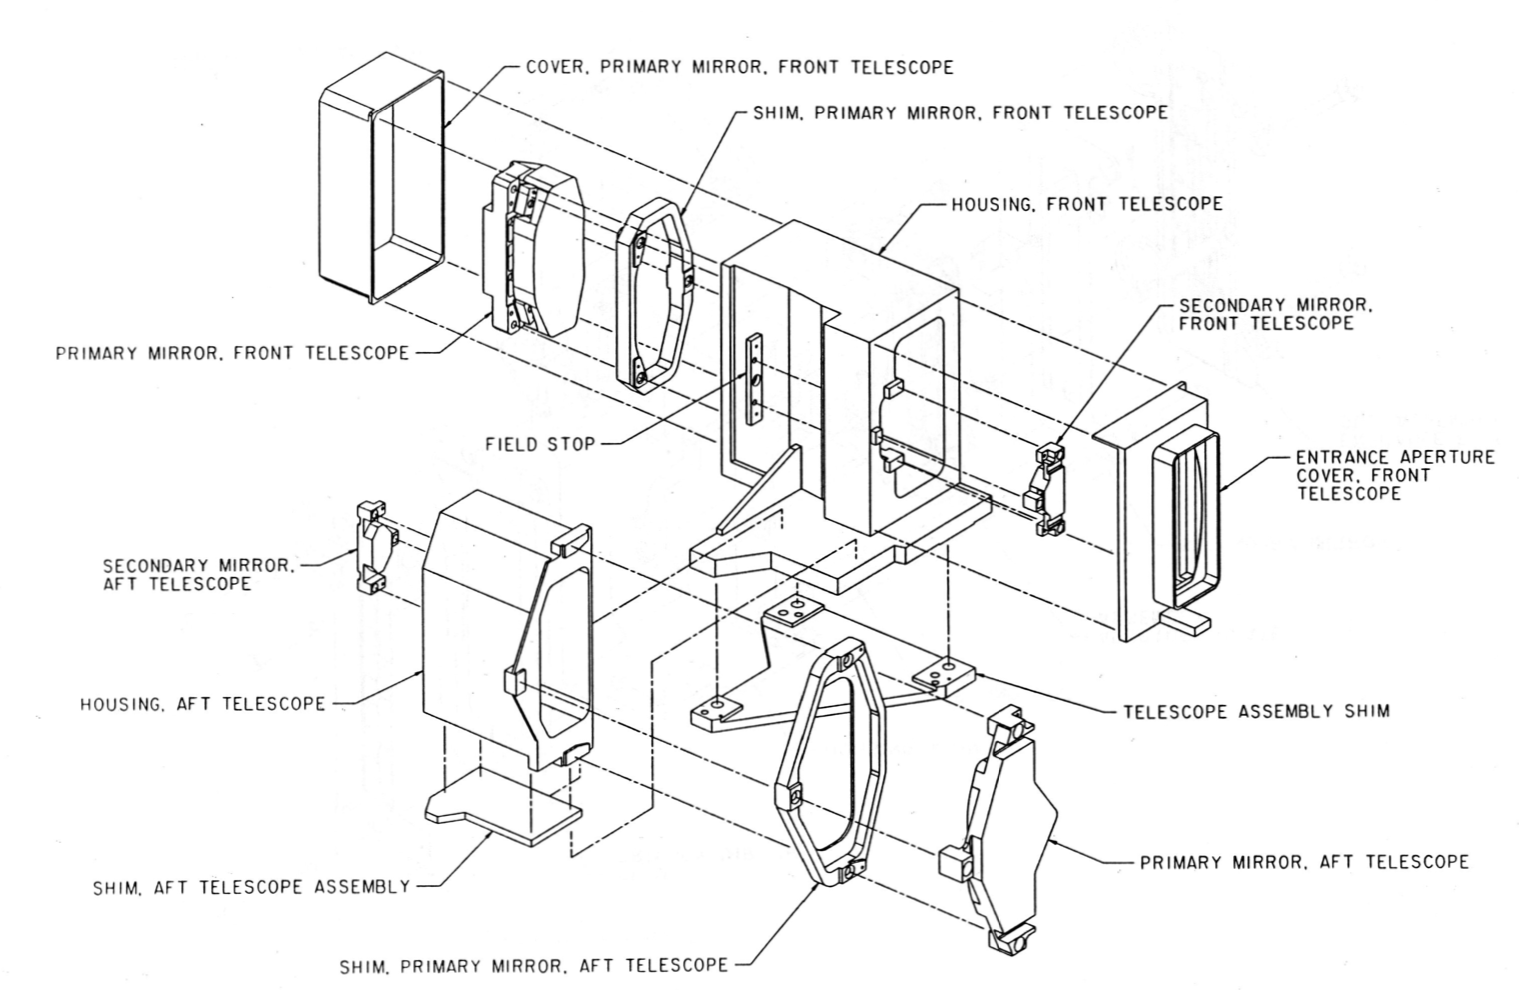 Exploded view of AIRS Afocal Telescope Assembly